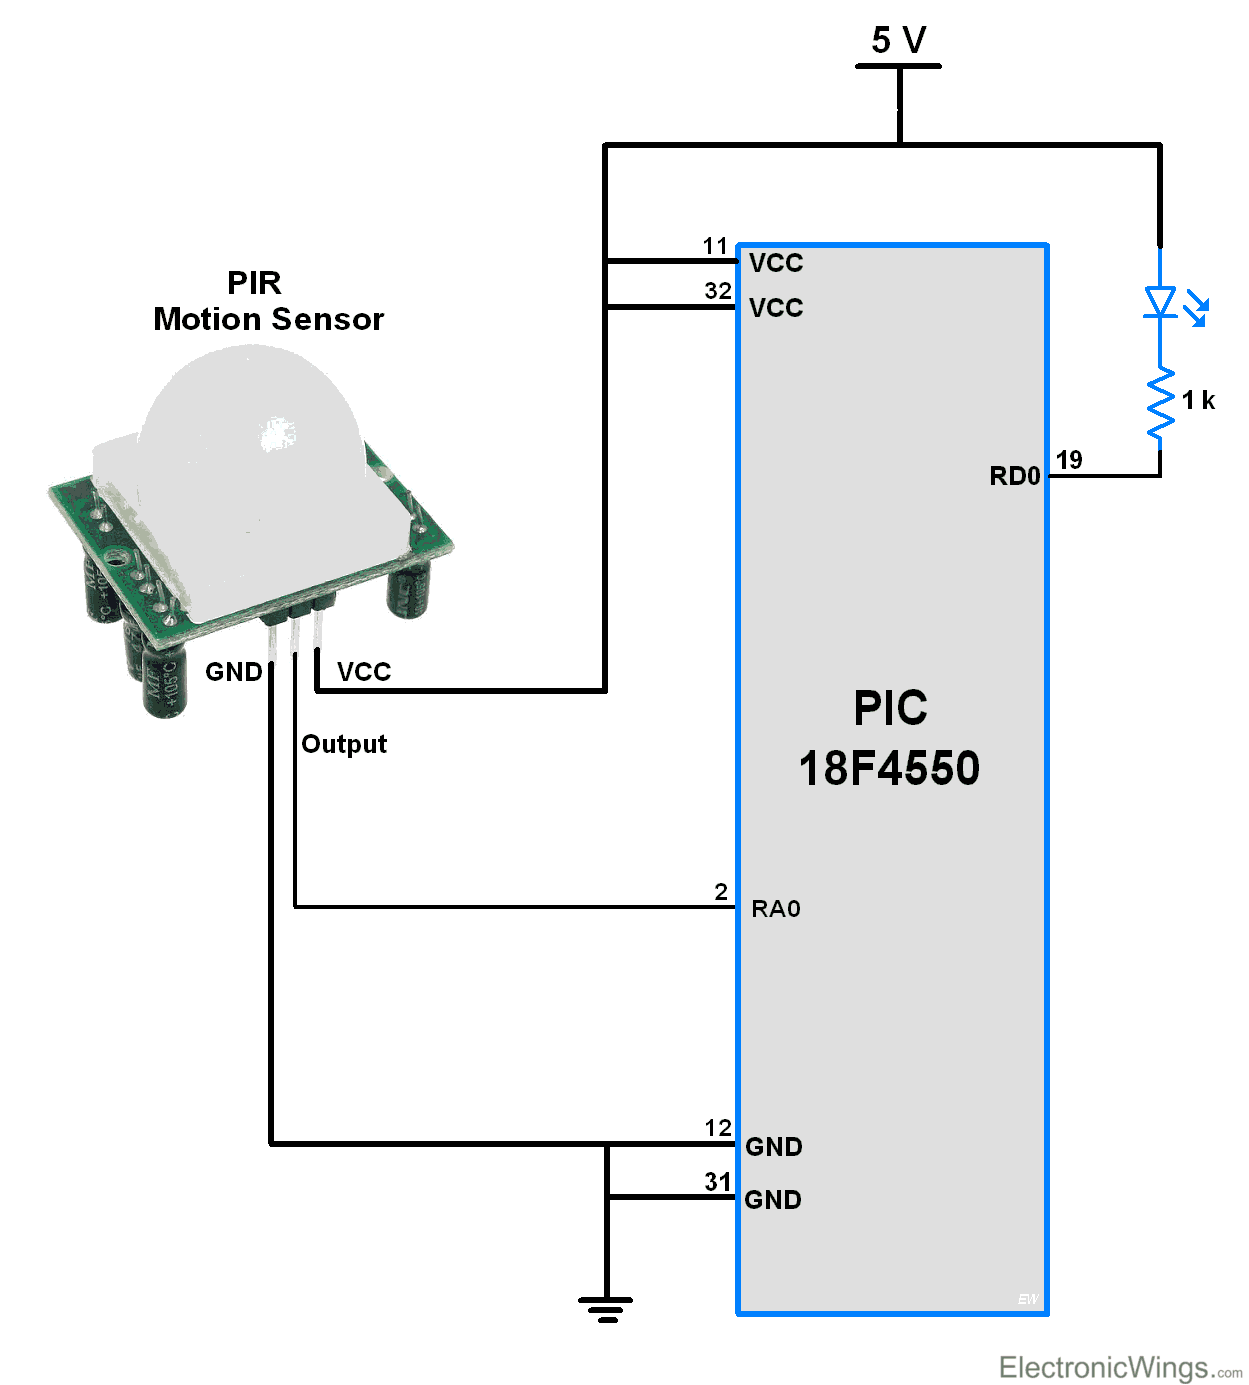 This is the picture of PIR Interfacing with PIC microcontroller